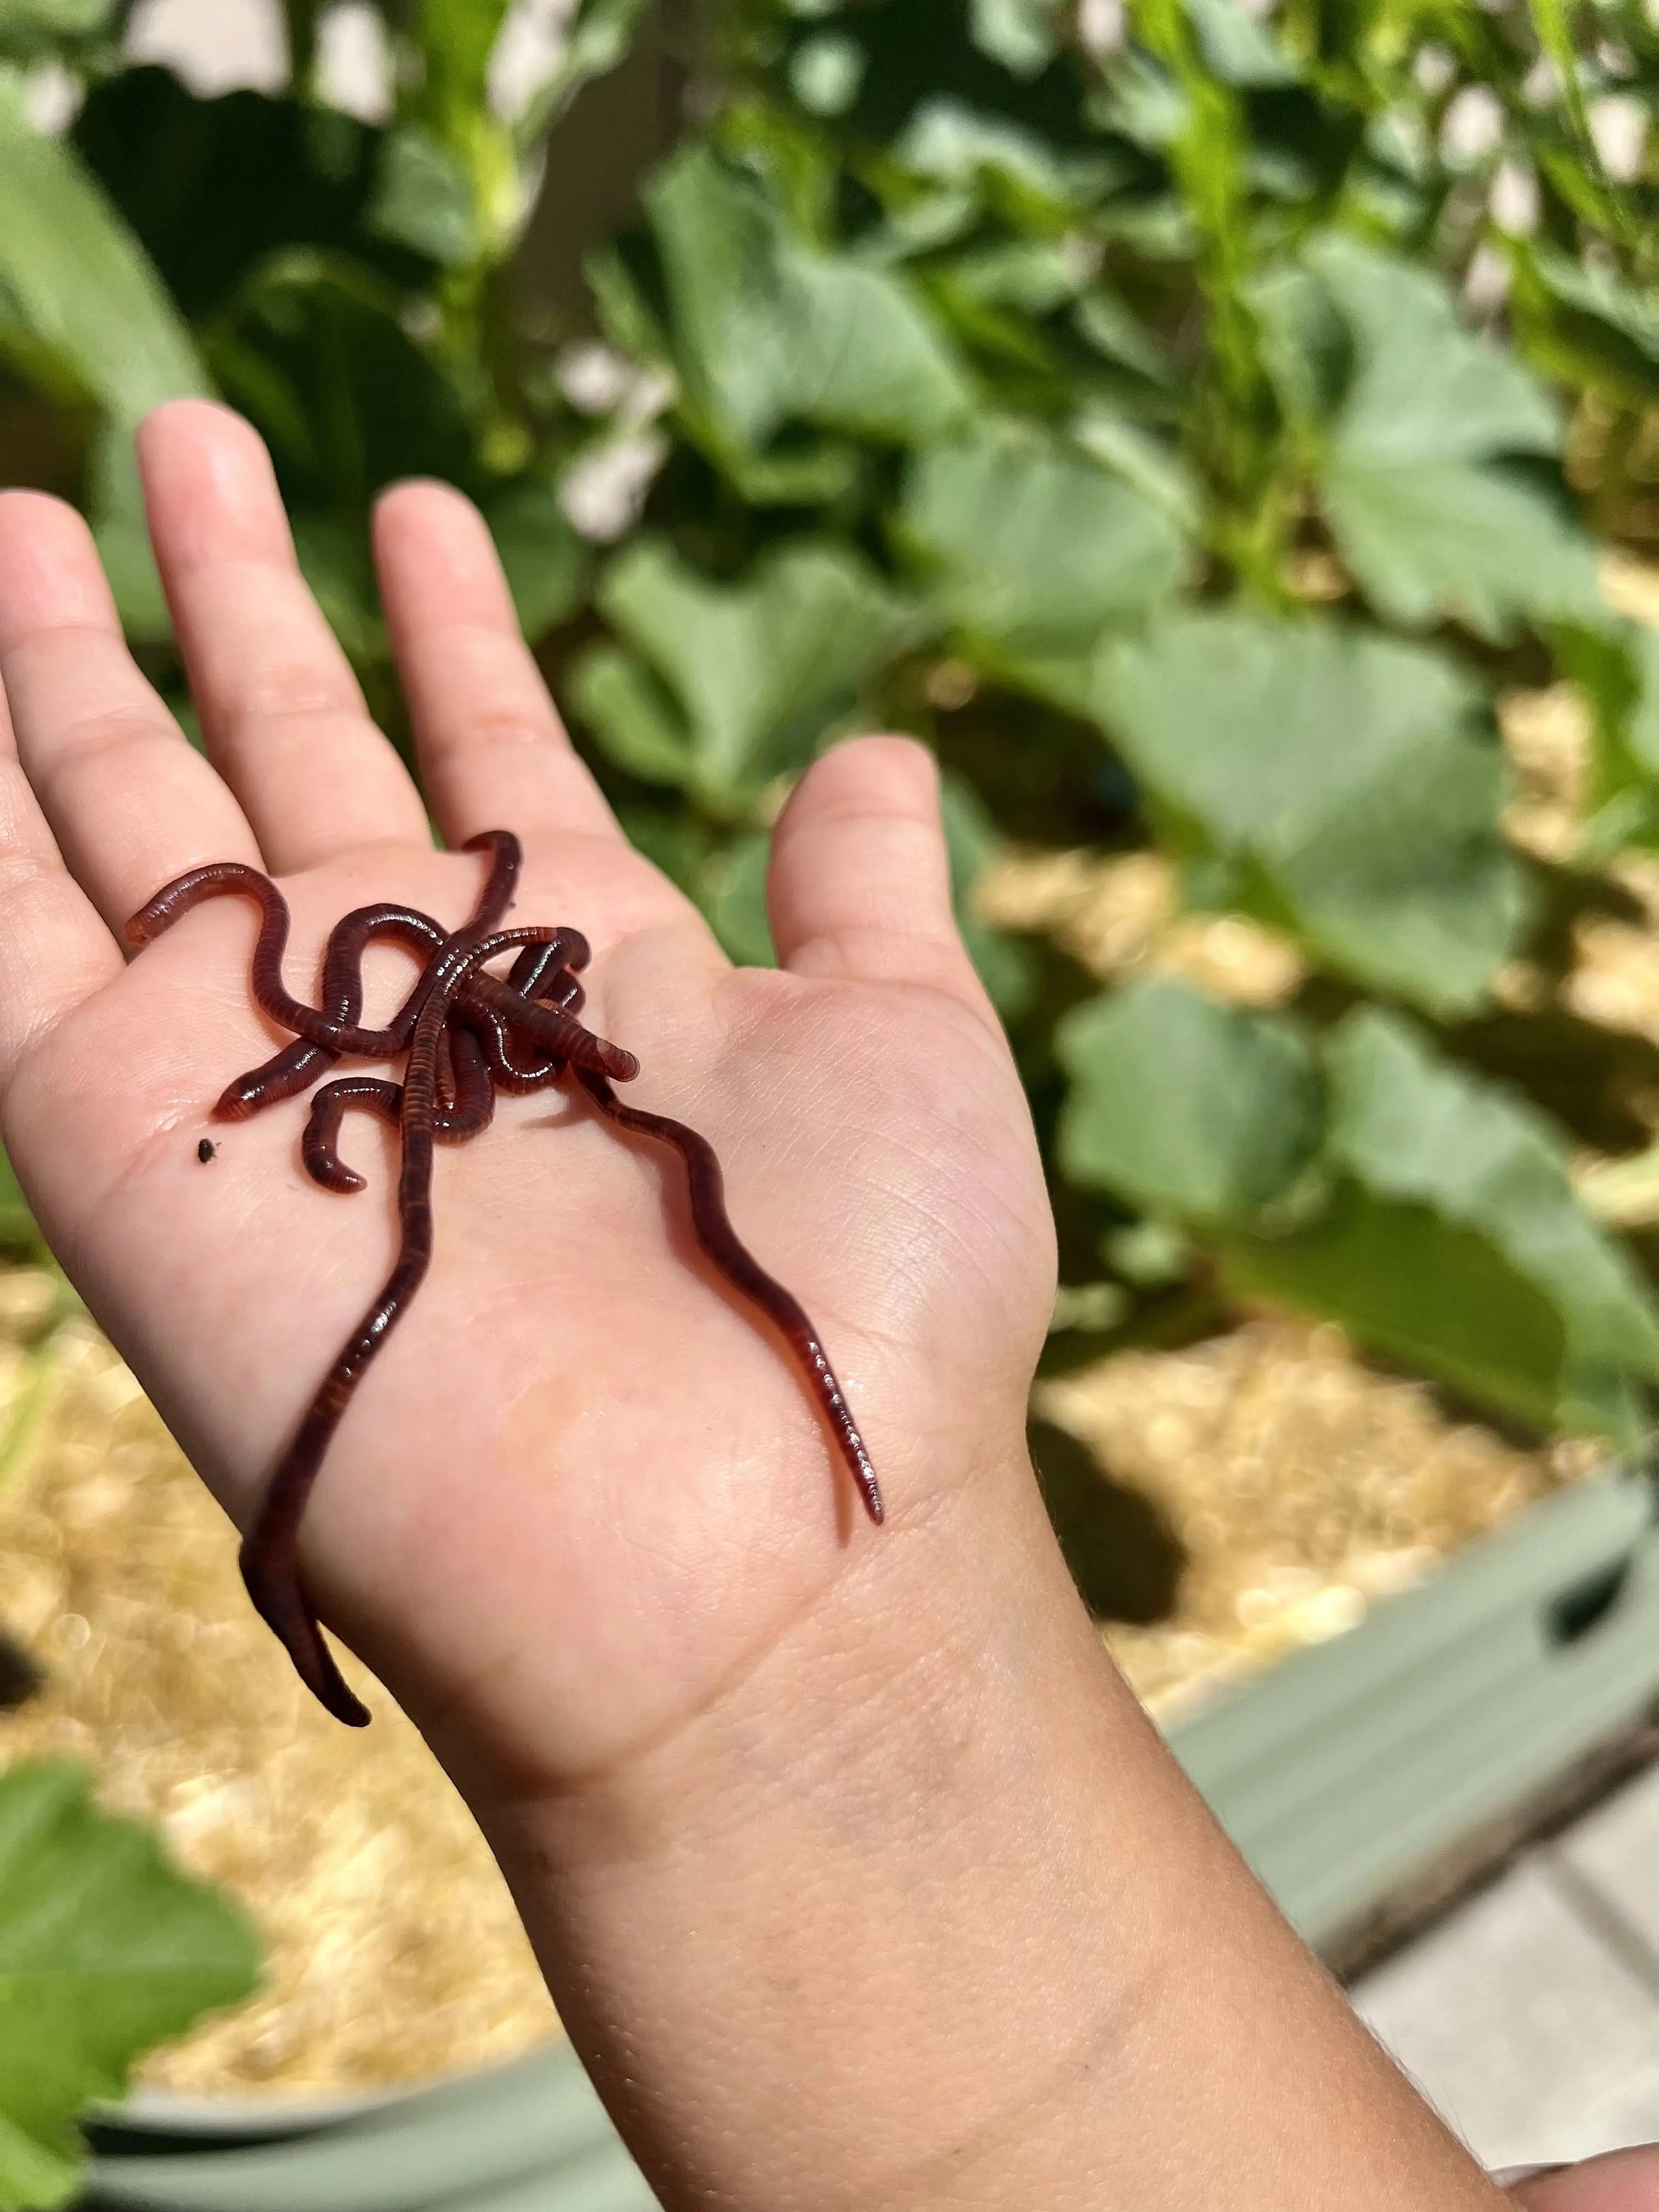 Pure Red Wiggler Composting Worms